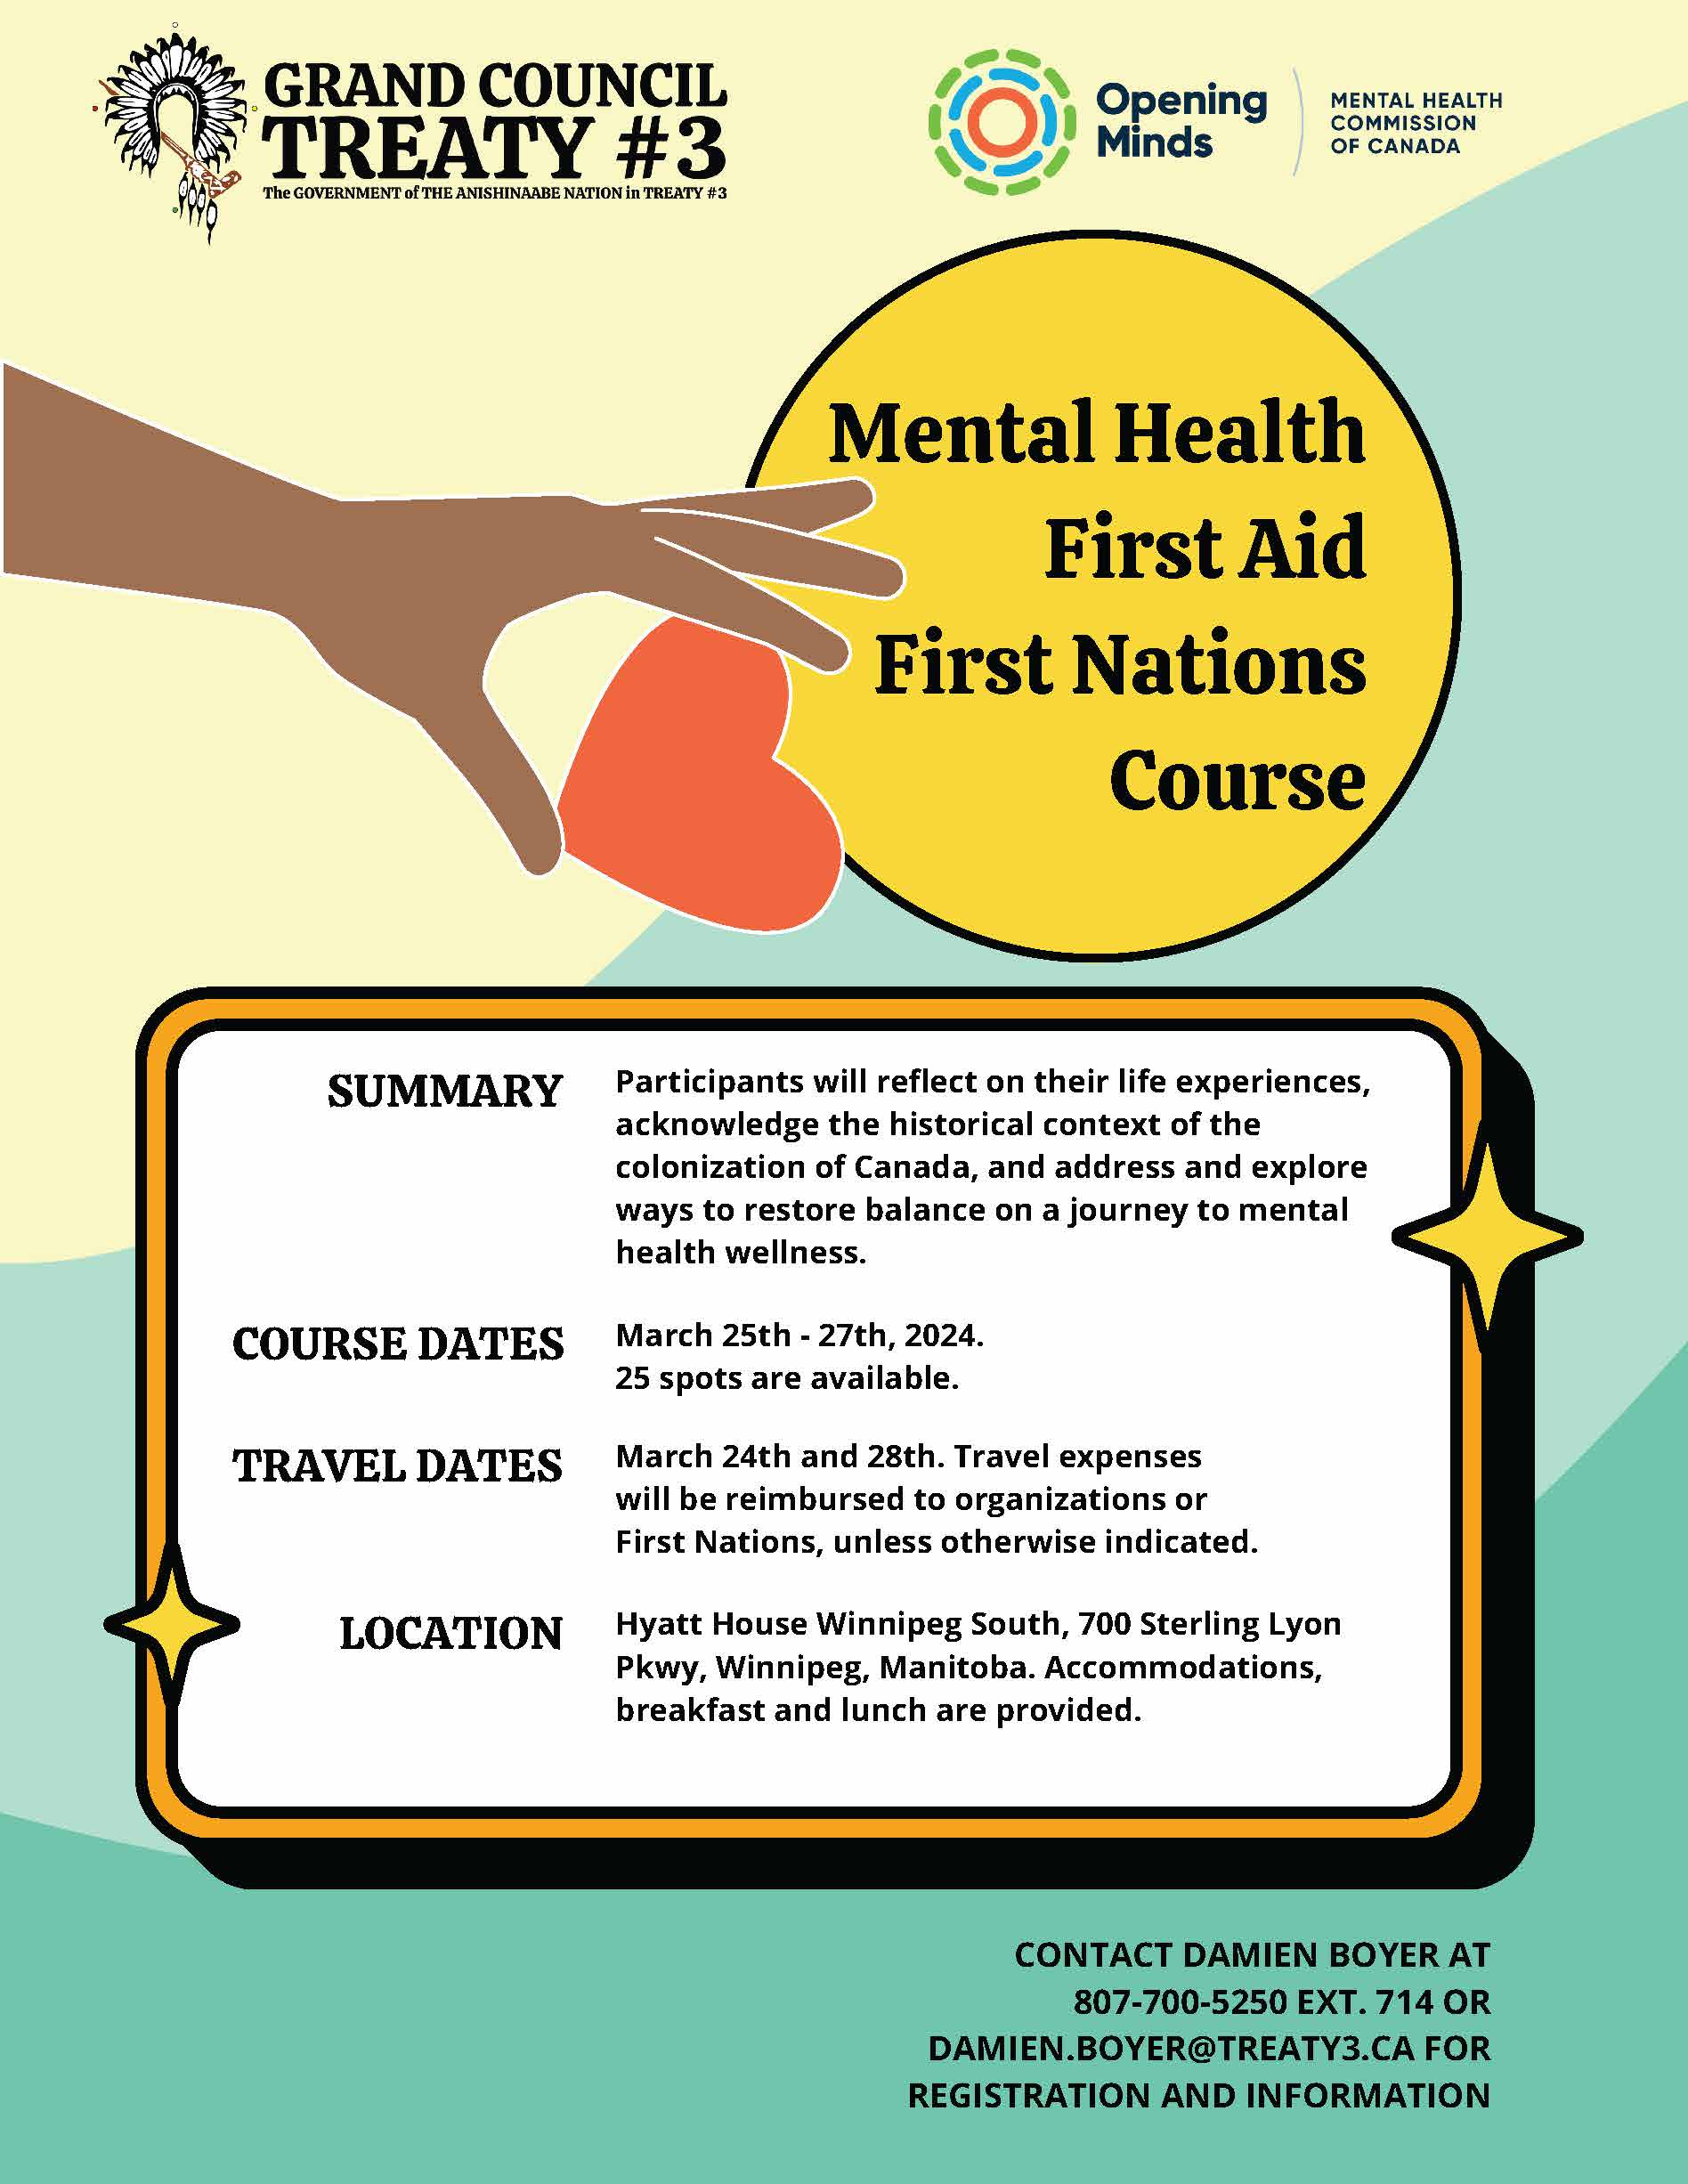 Mental Health First Aid First Nations Course